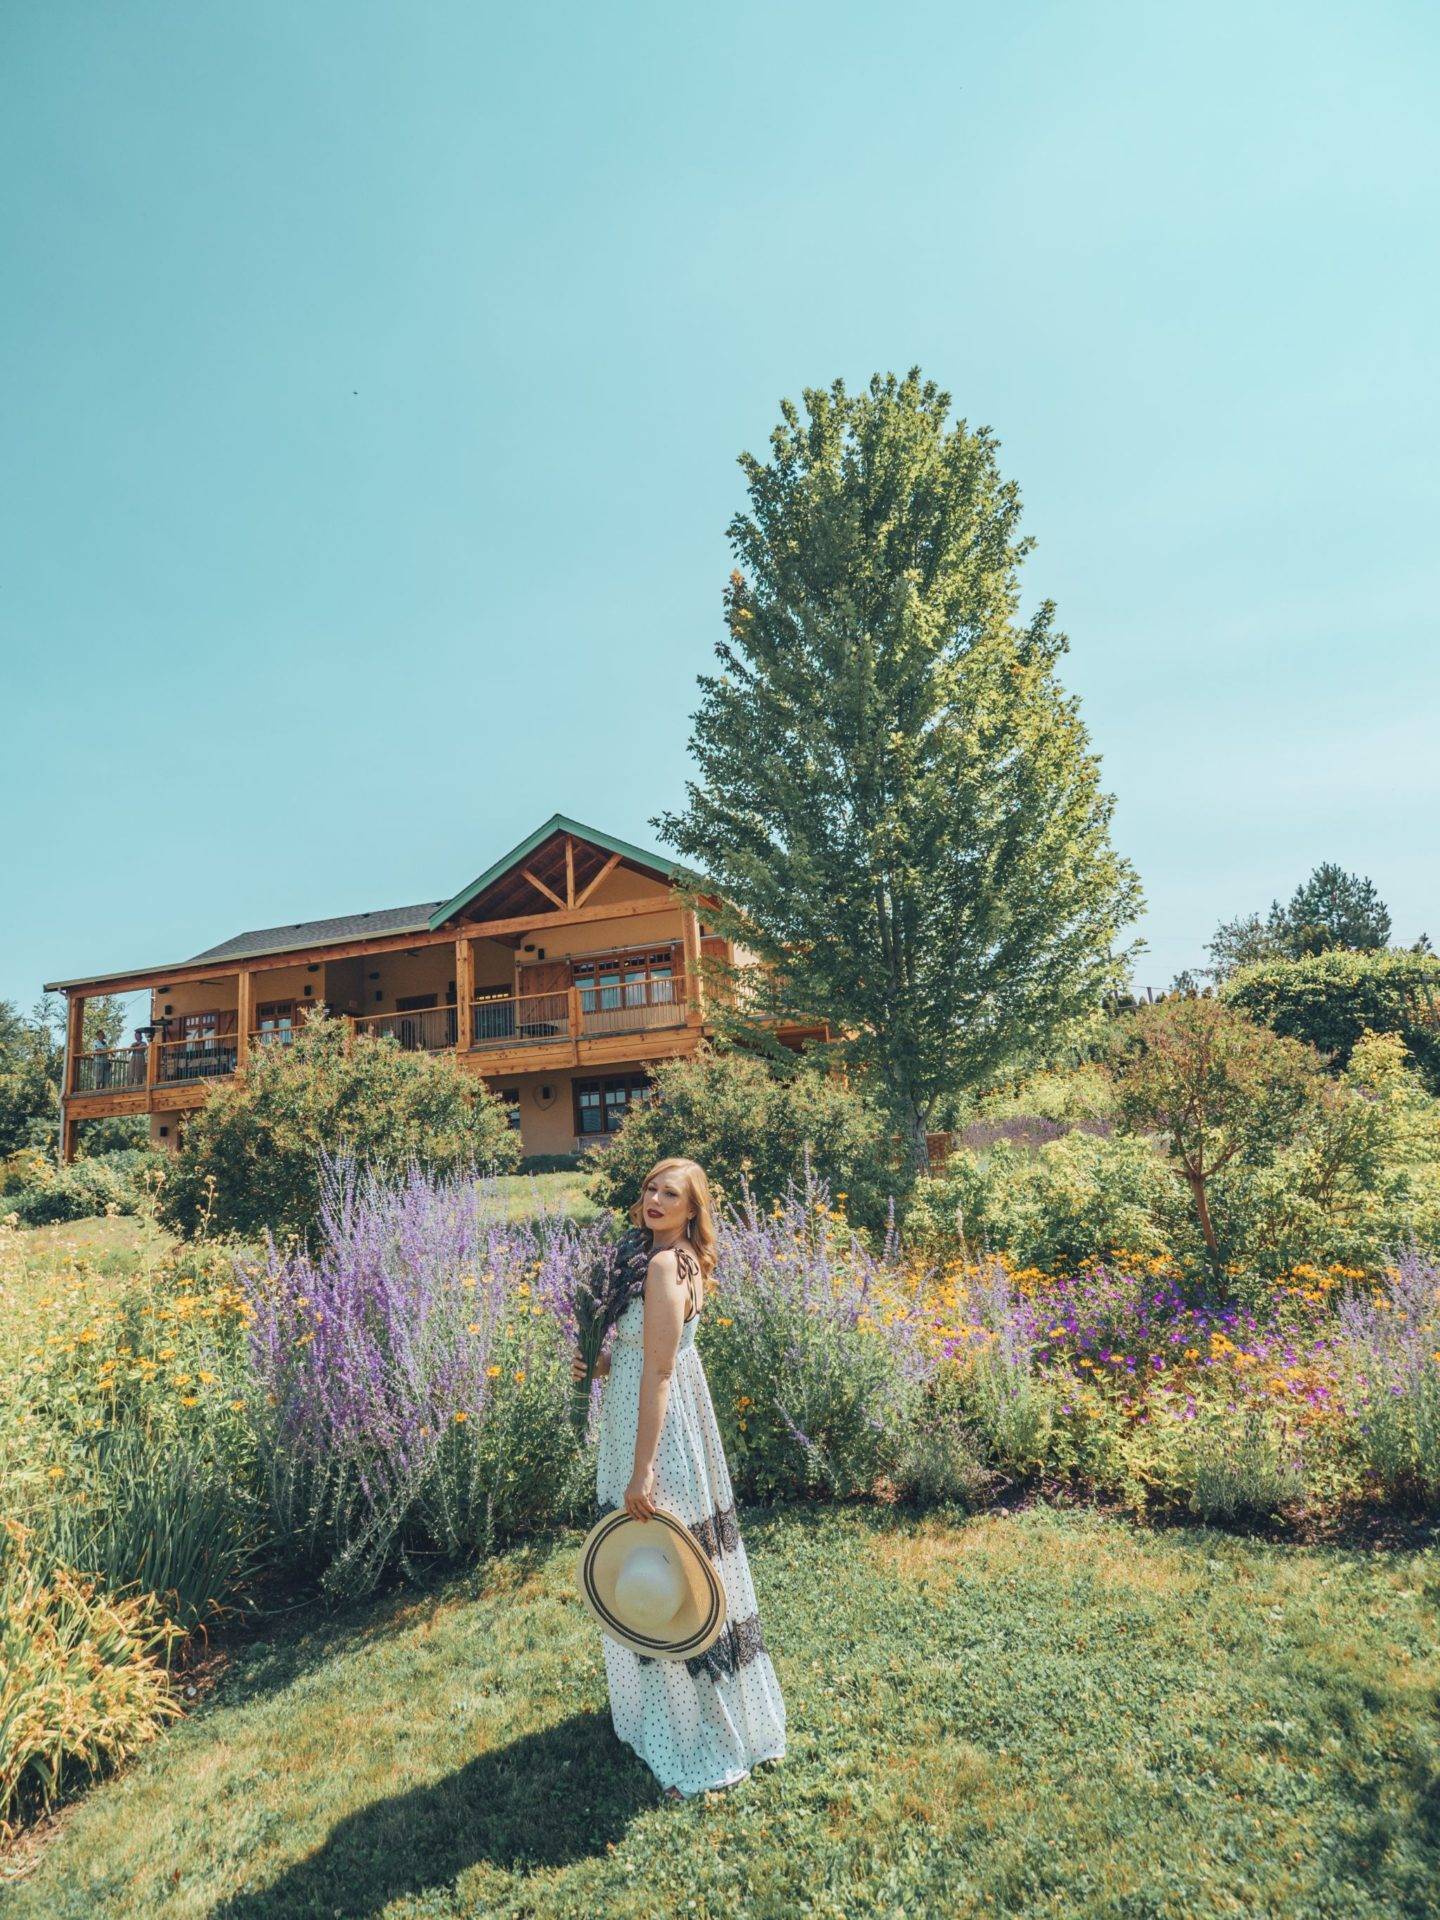 Looking for the most beautiful Instagrammable places in Kelowna? Check out this guide to find the best photography spots in Kelowna! 

Pictured here: The Okanagan Lavender and Herb Farm